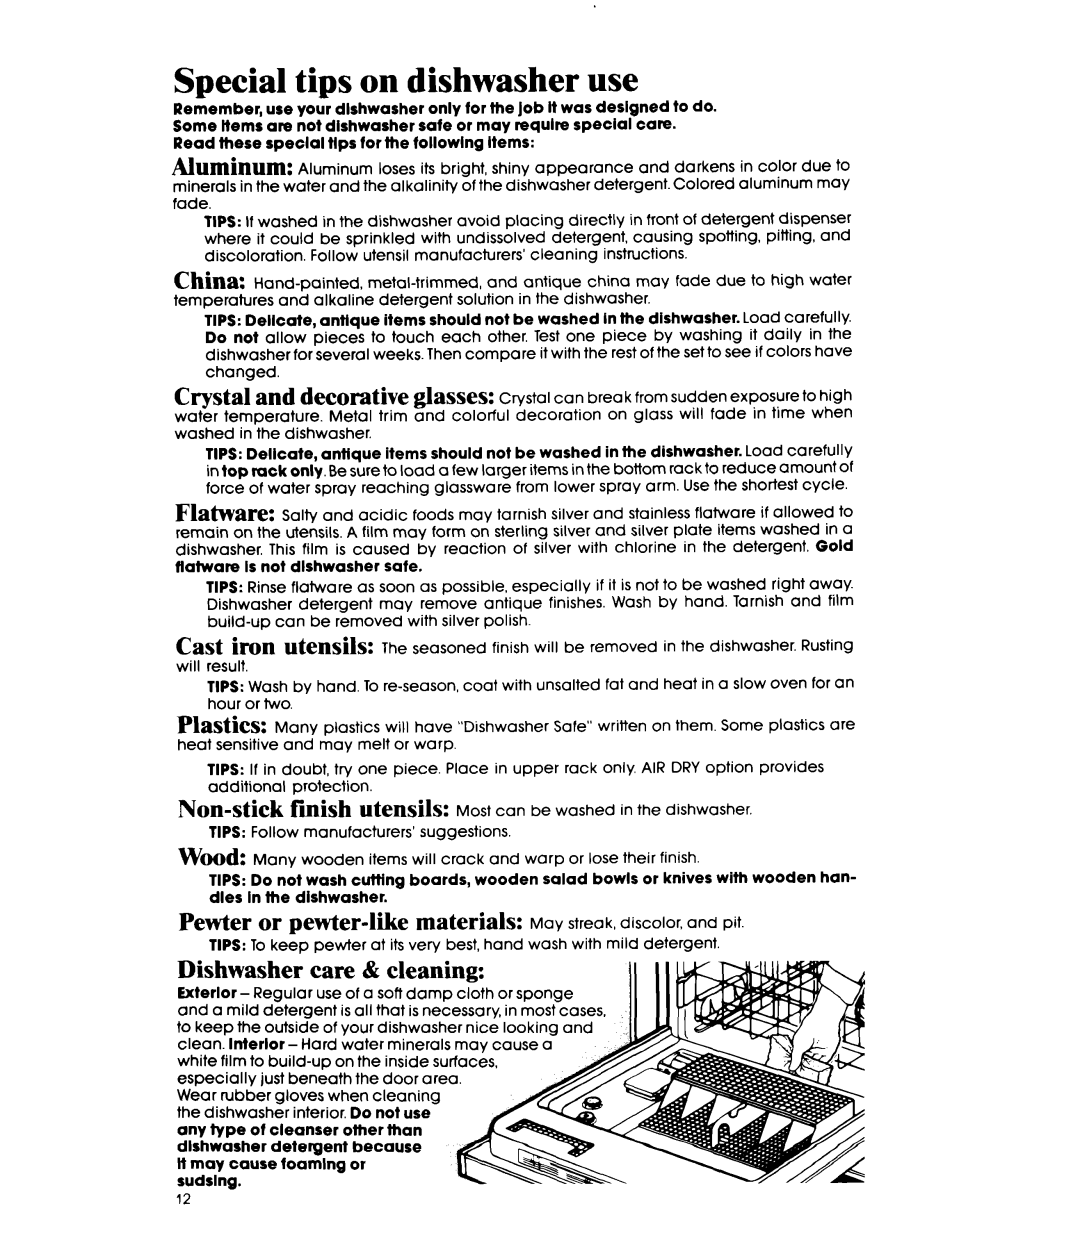 Whirlpool DU95OOXS manual Special tips on dishwasher use, Non-stick, Dishwasher care & cleaning 